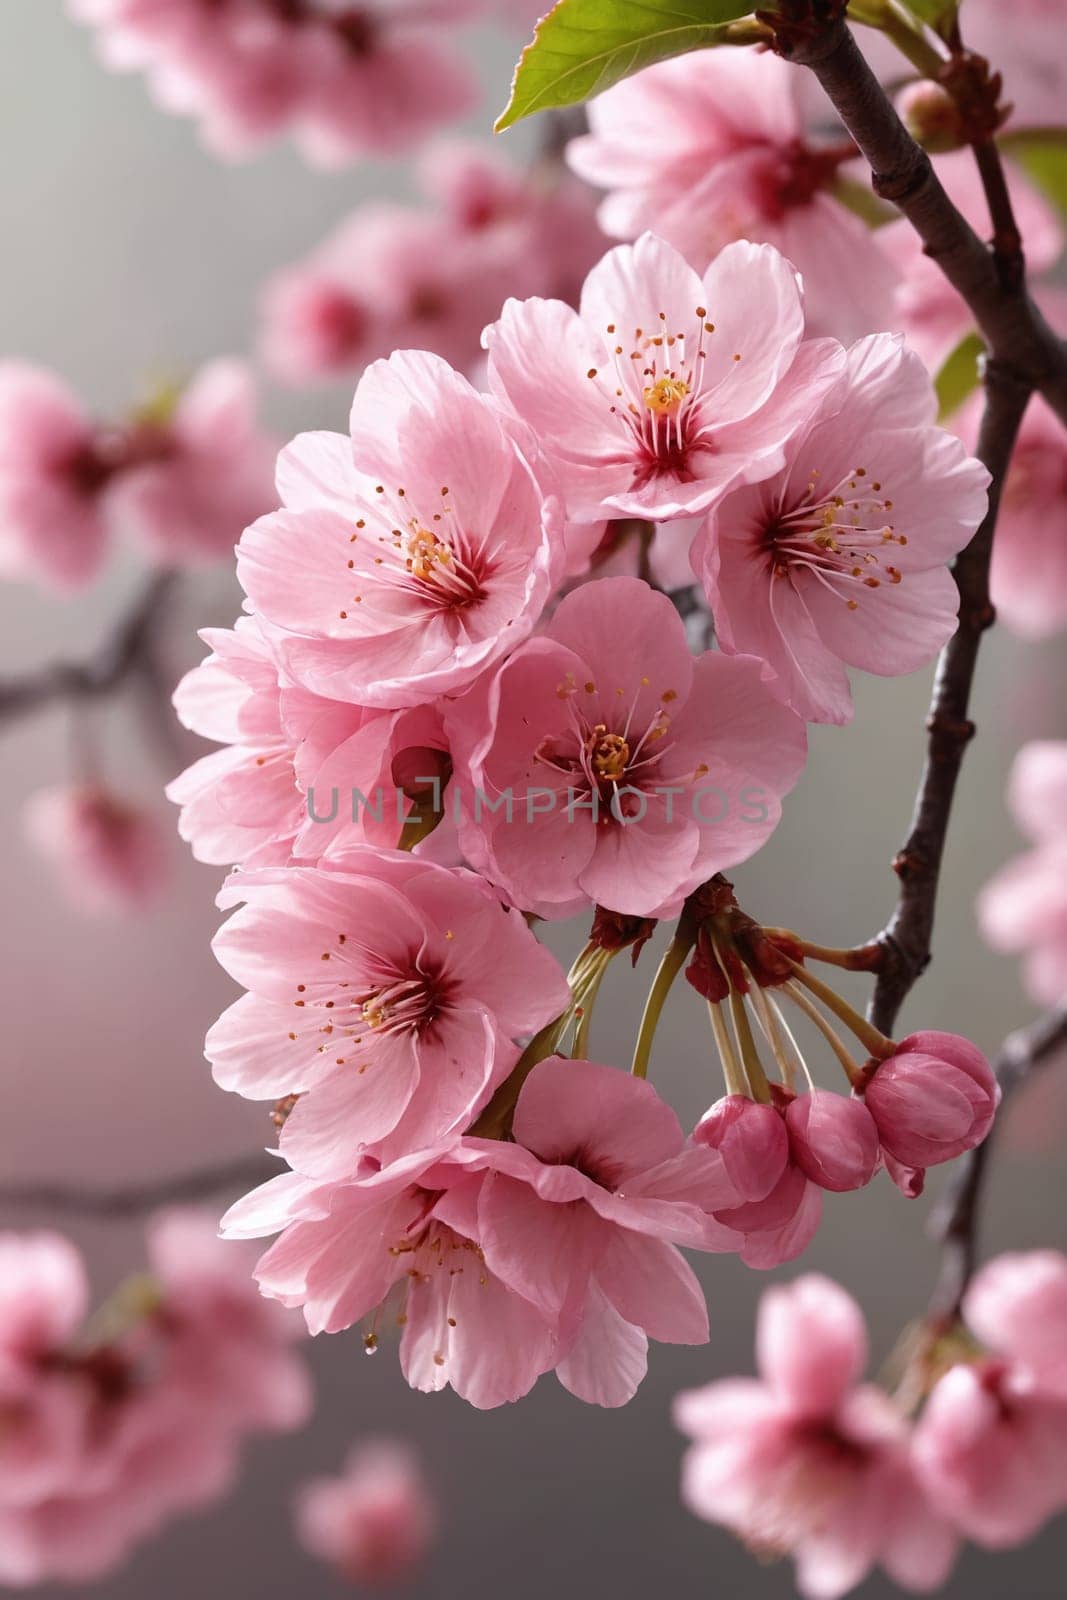 Celebrate spring with this stunning photo of cherry blossoms, symbolizing renewal with their soft pink hues.